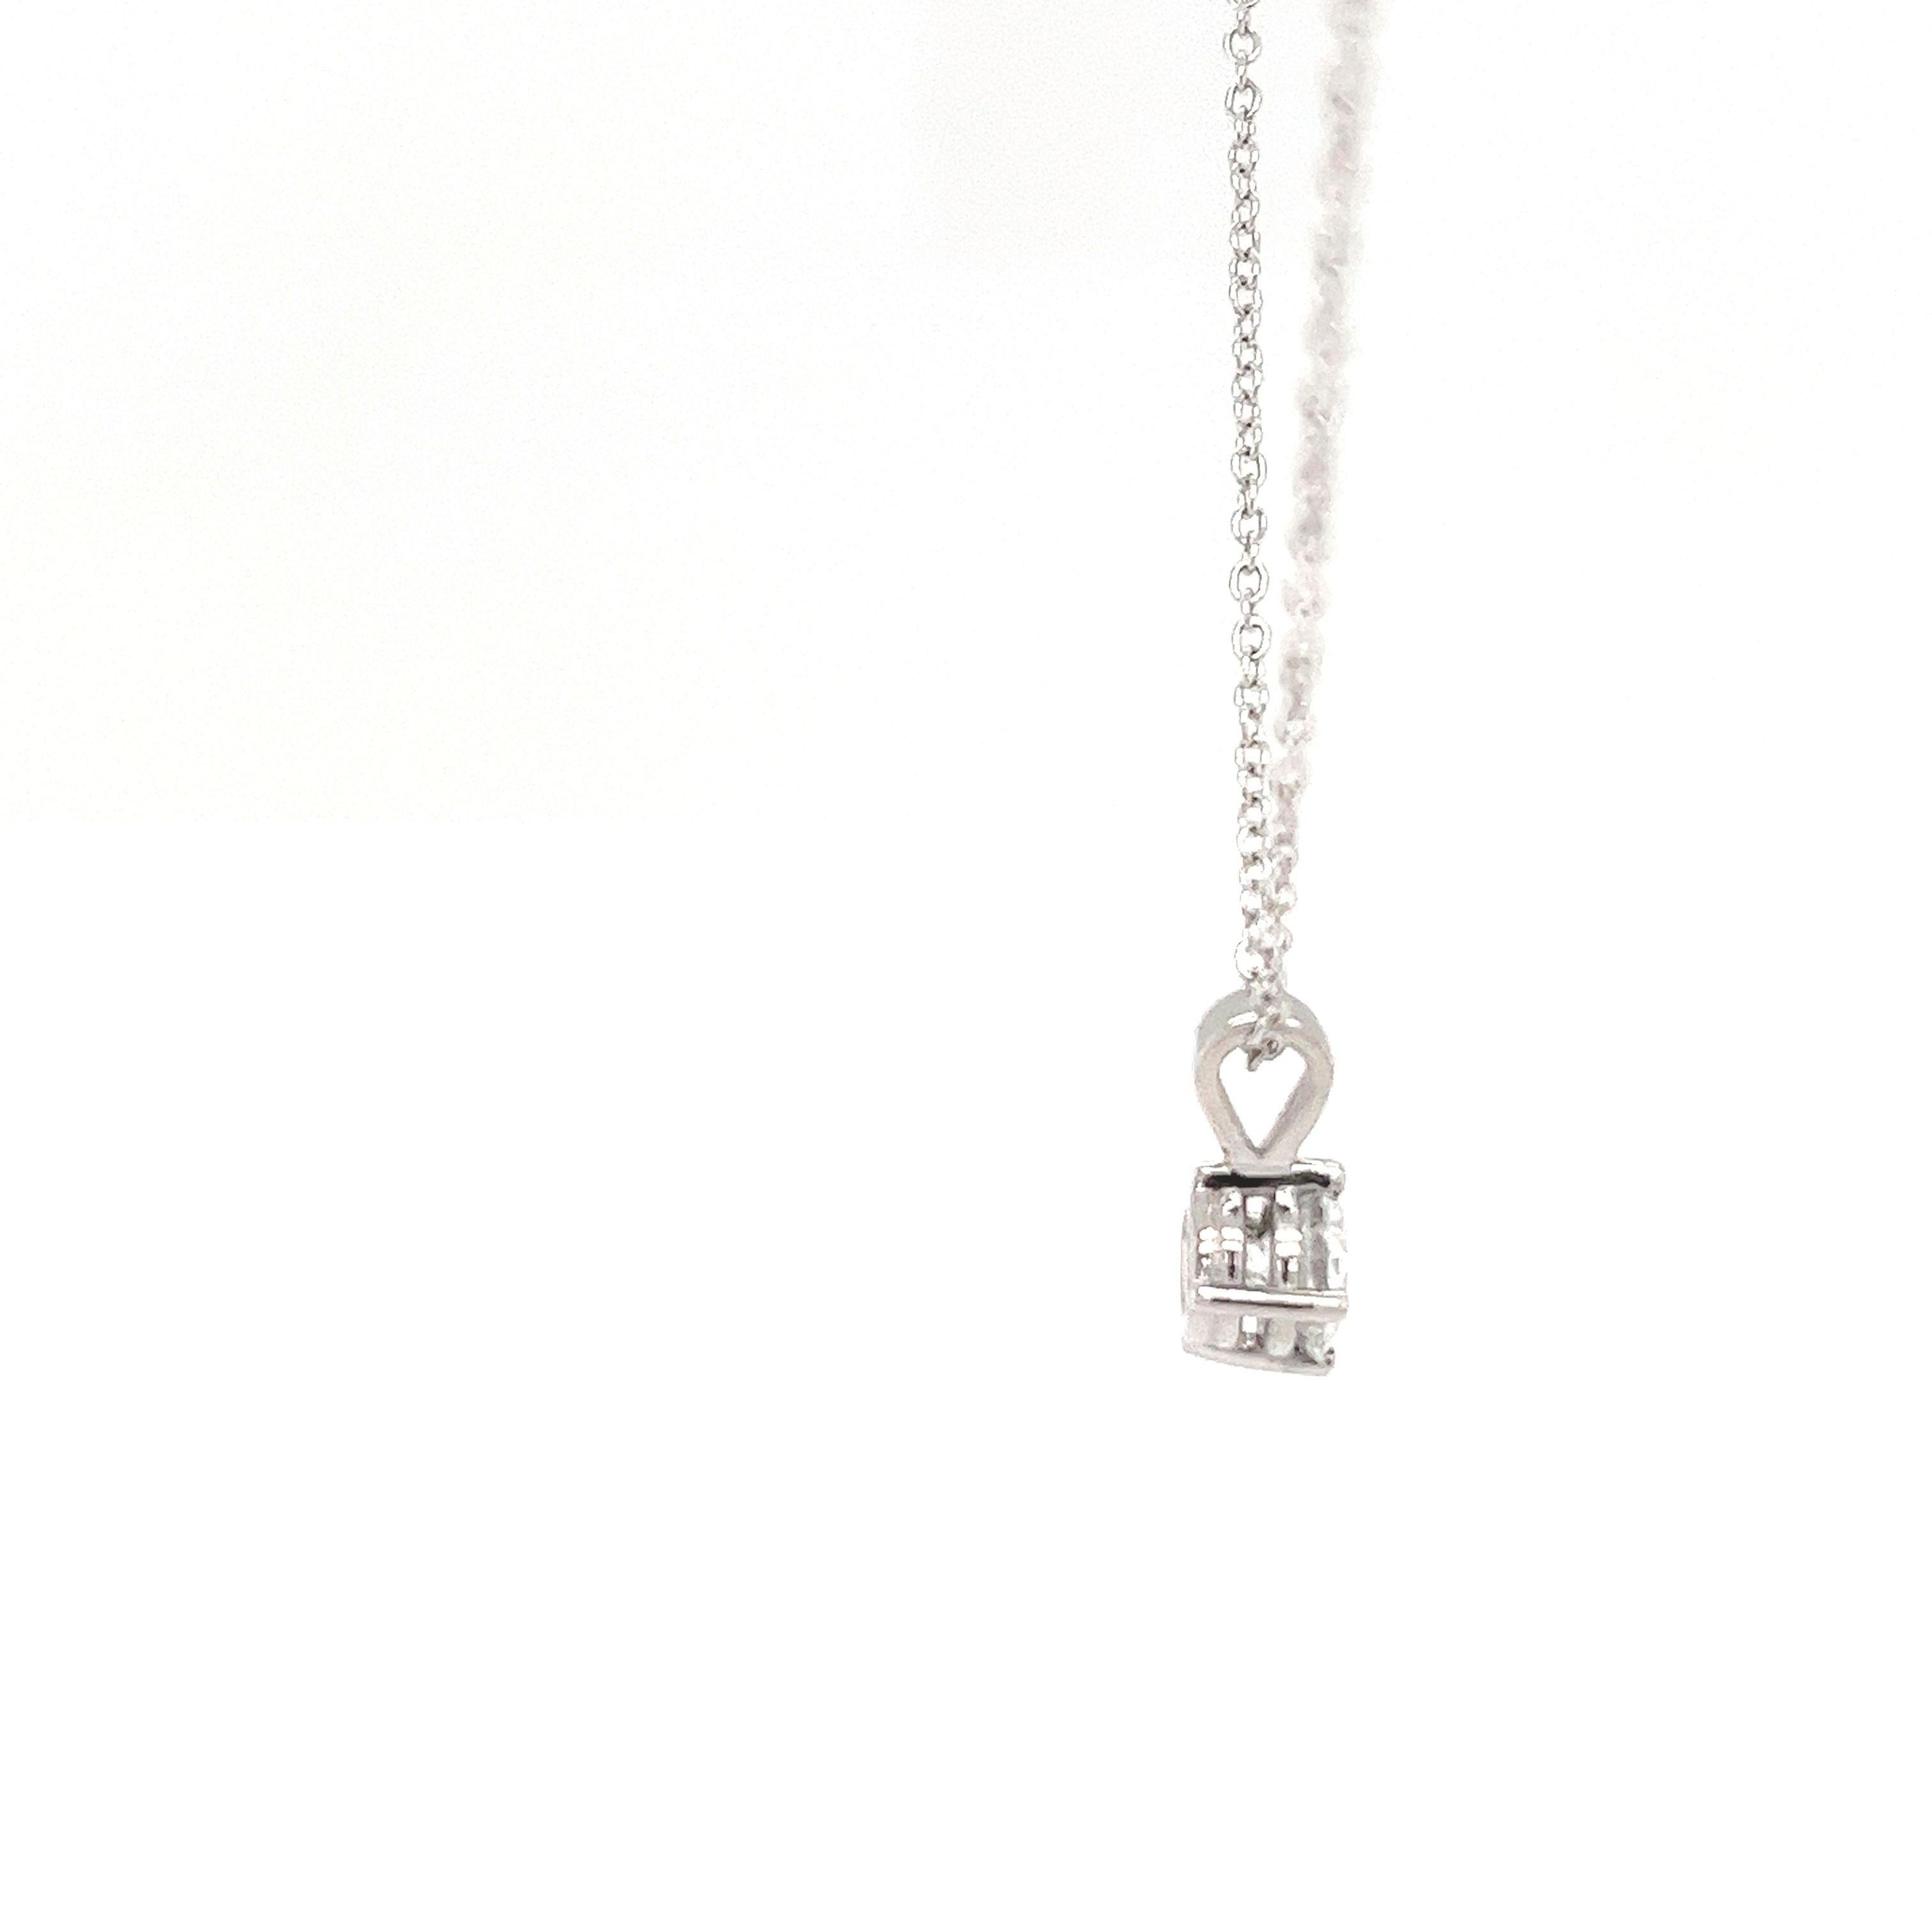 The necklace chain is designed to hold 
the pendant at the center of the chest, set with 1 round brilliant cut diamond 0.41ct E/VVS2 EGL certified
making it a very elegant and beautiful piece of jewellery. 
Total Diamond Weight: 0.41ct
Diamond